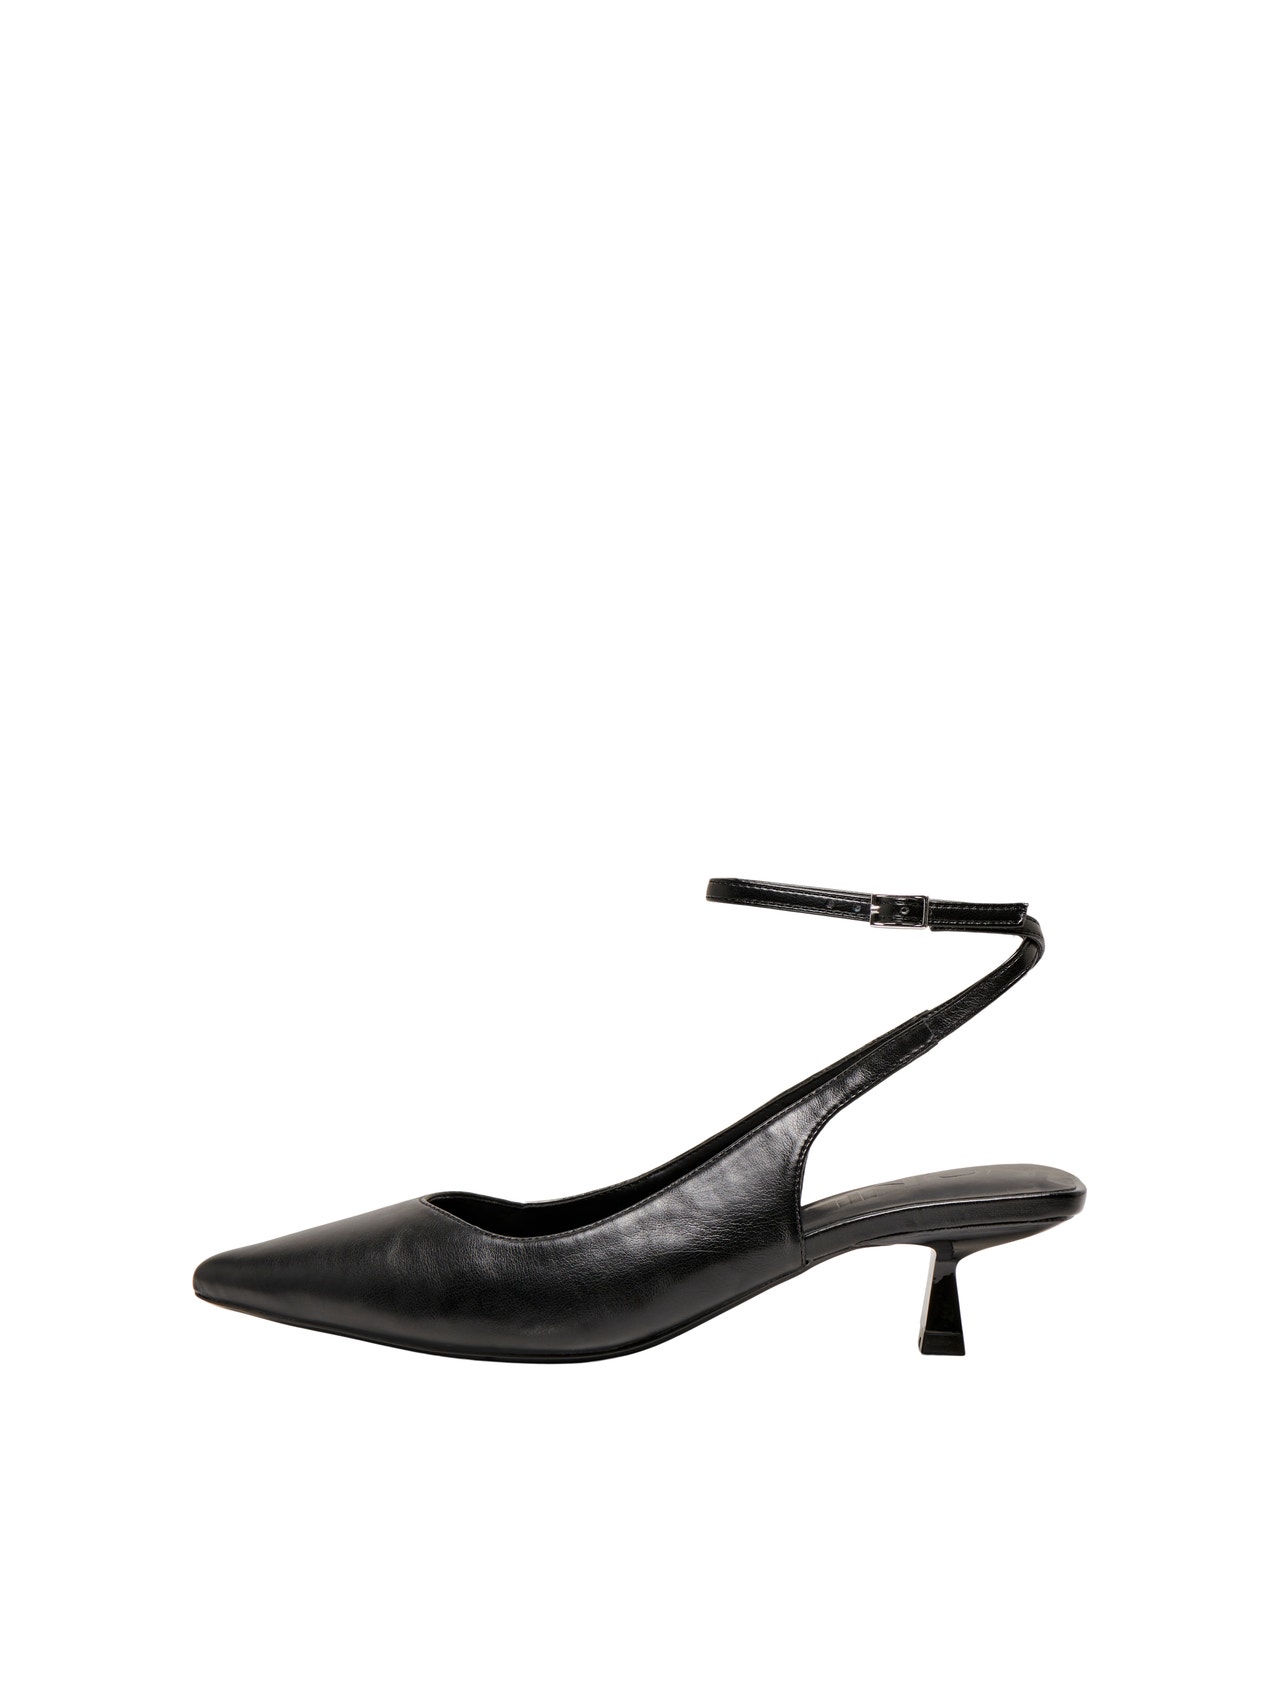 ONLY High heels with pointed toe -Black - 15304303